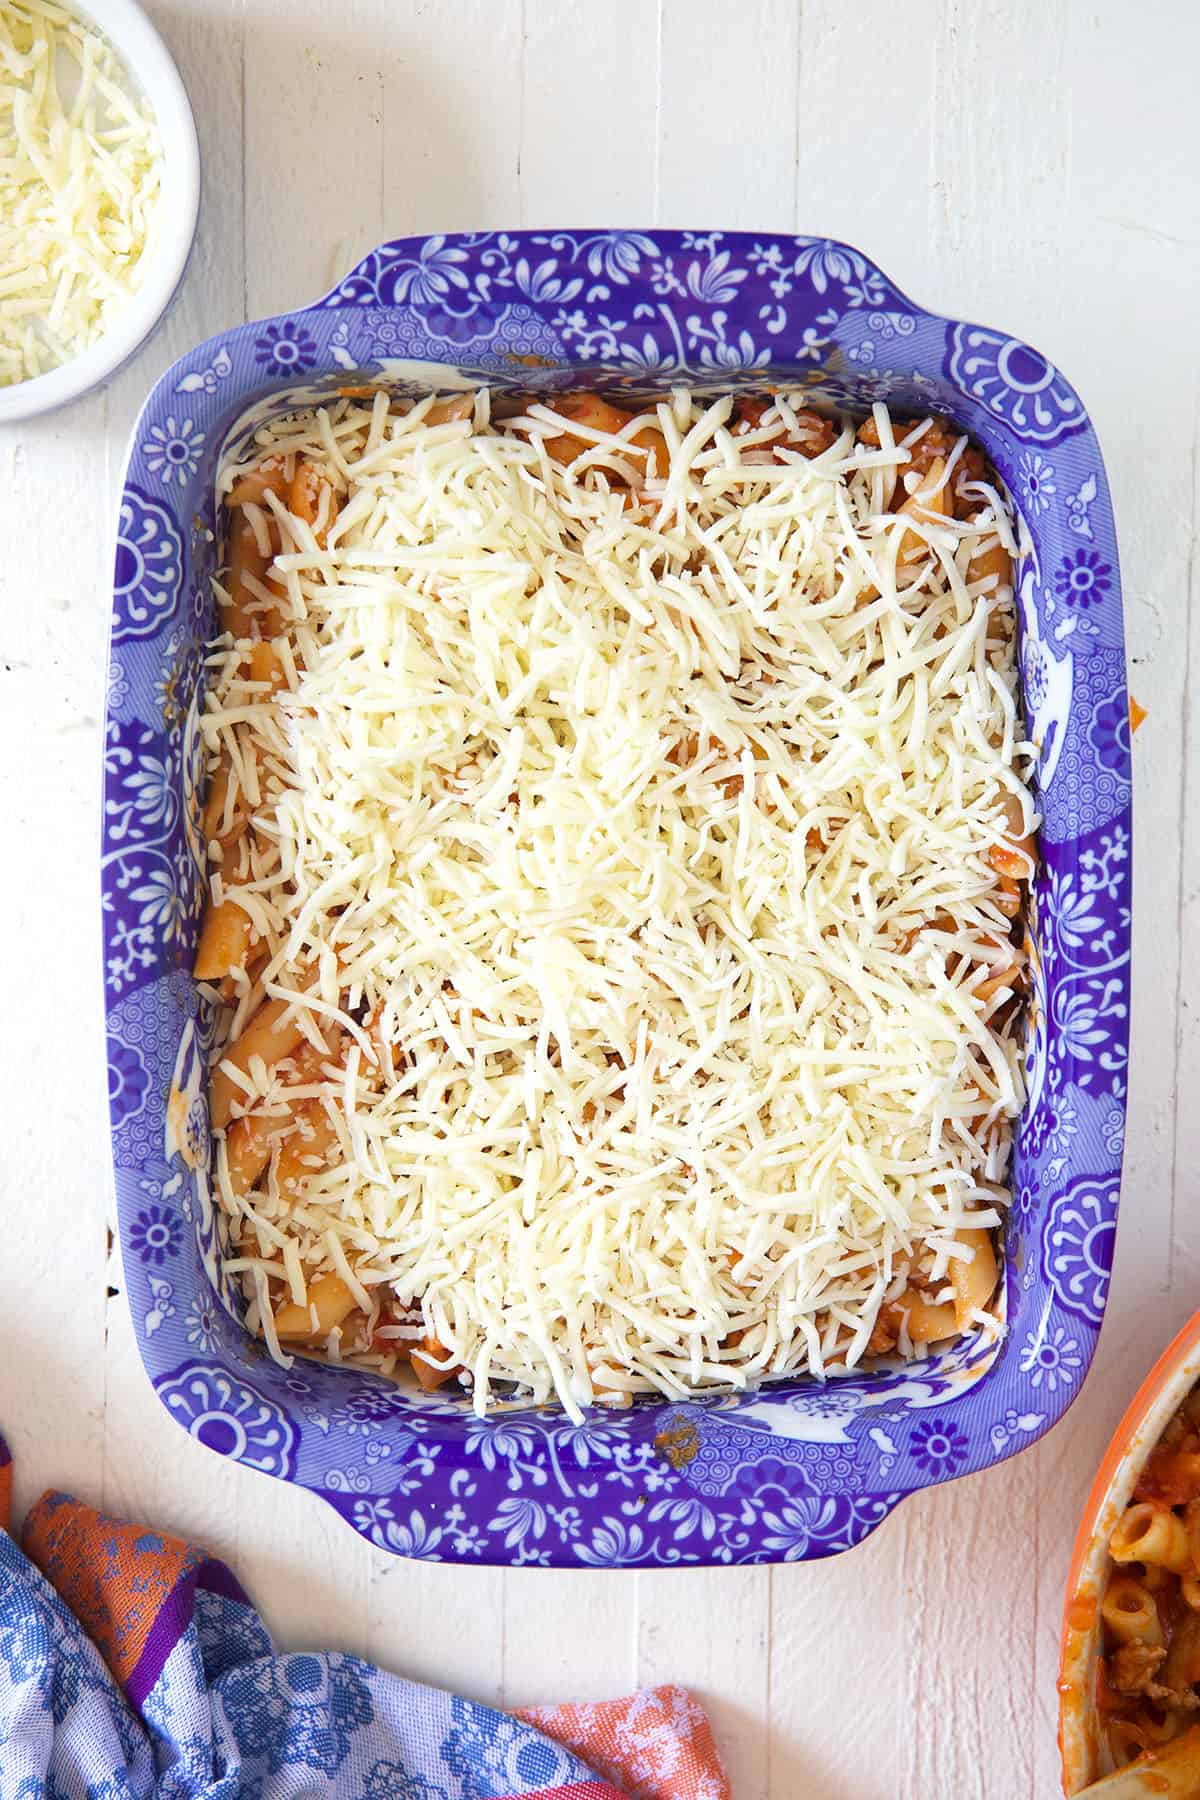 Shredded cheese is sprinkled evenly on top of saucy pasta in a baking dish.